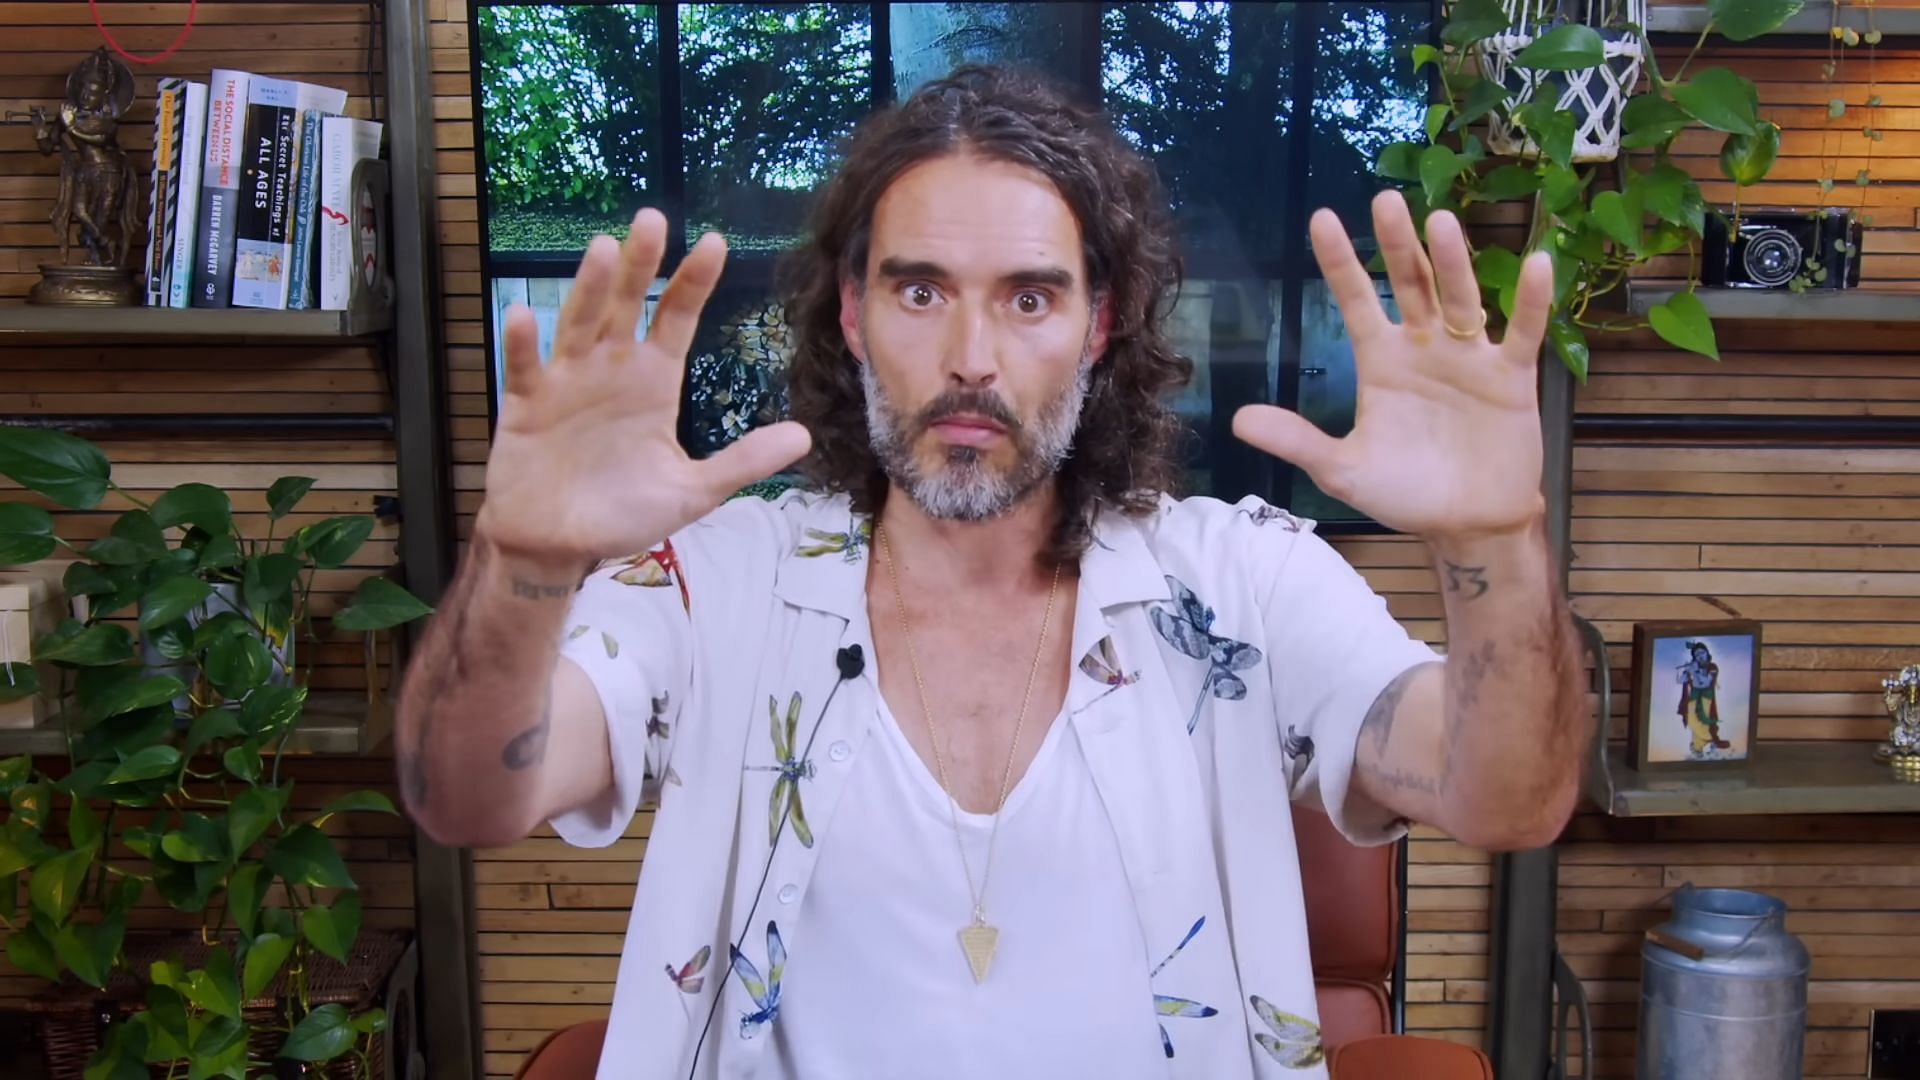 Russel brand denies potential serious allegations against him (Image via Youtube/Russel Brand)